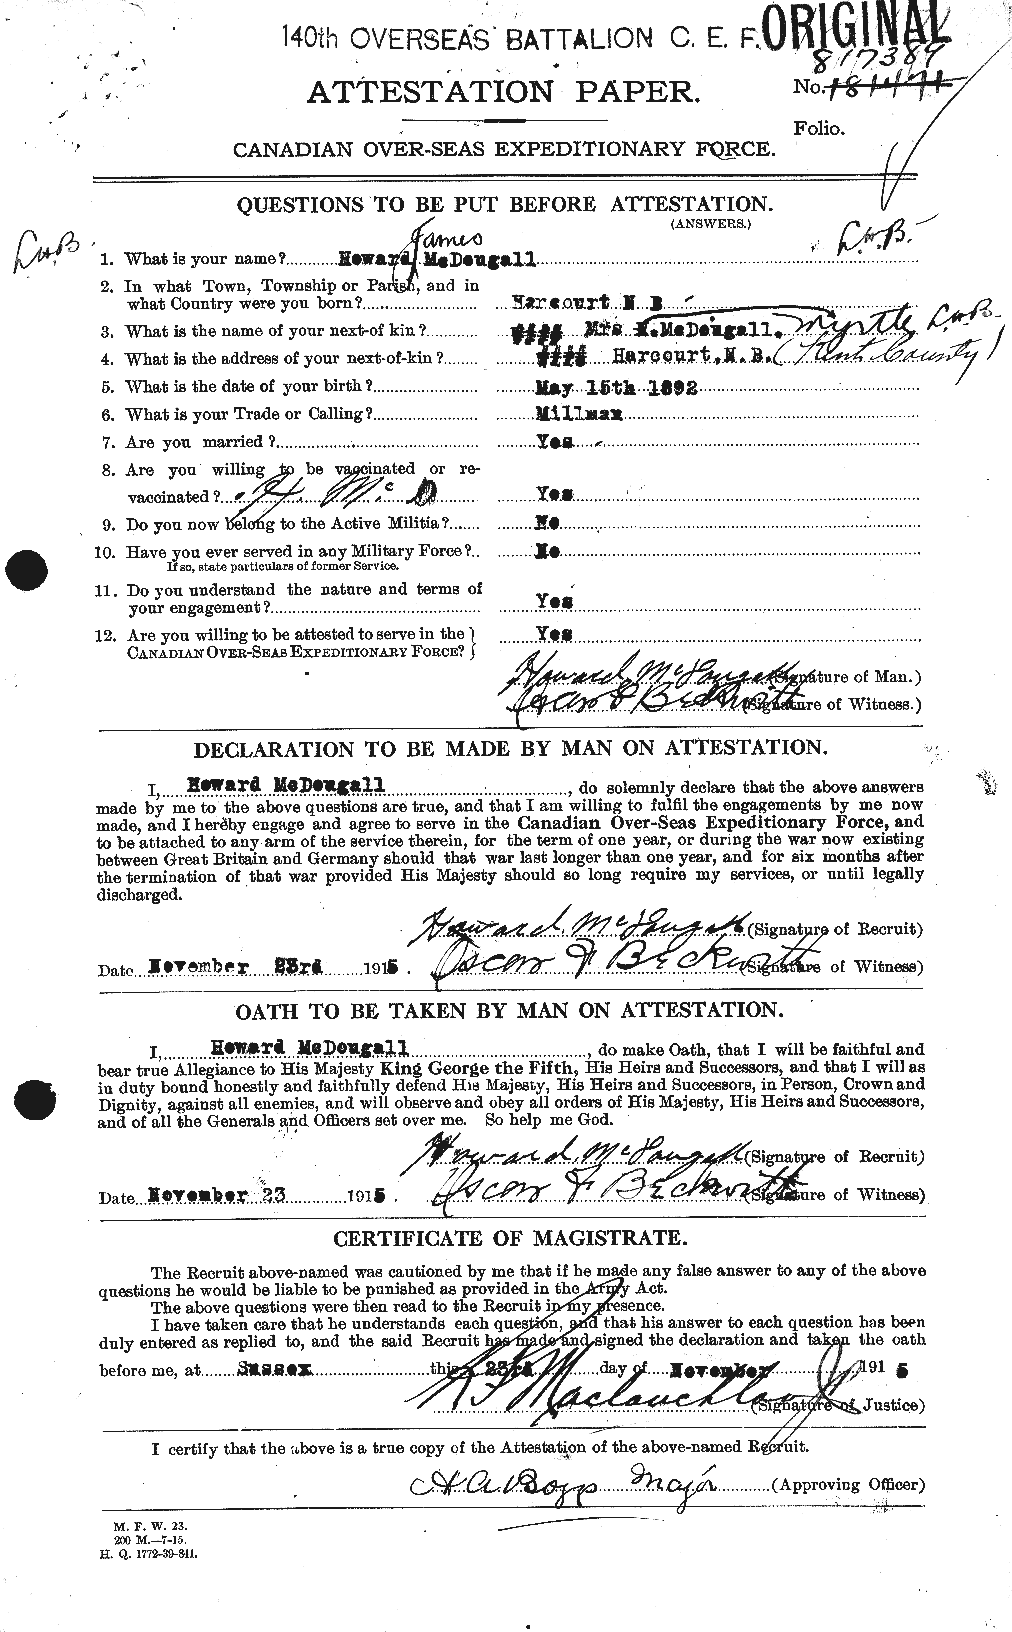 Personnel Records of the First World War - CEF 518157a